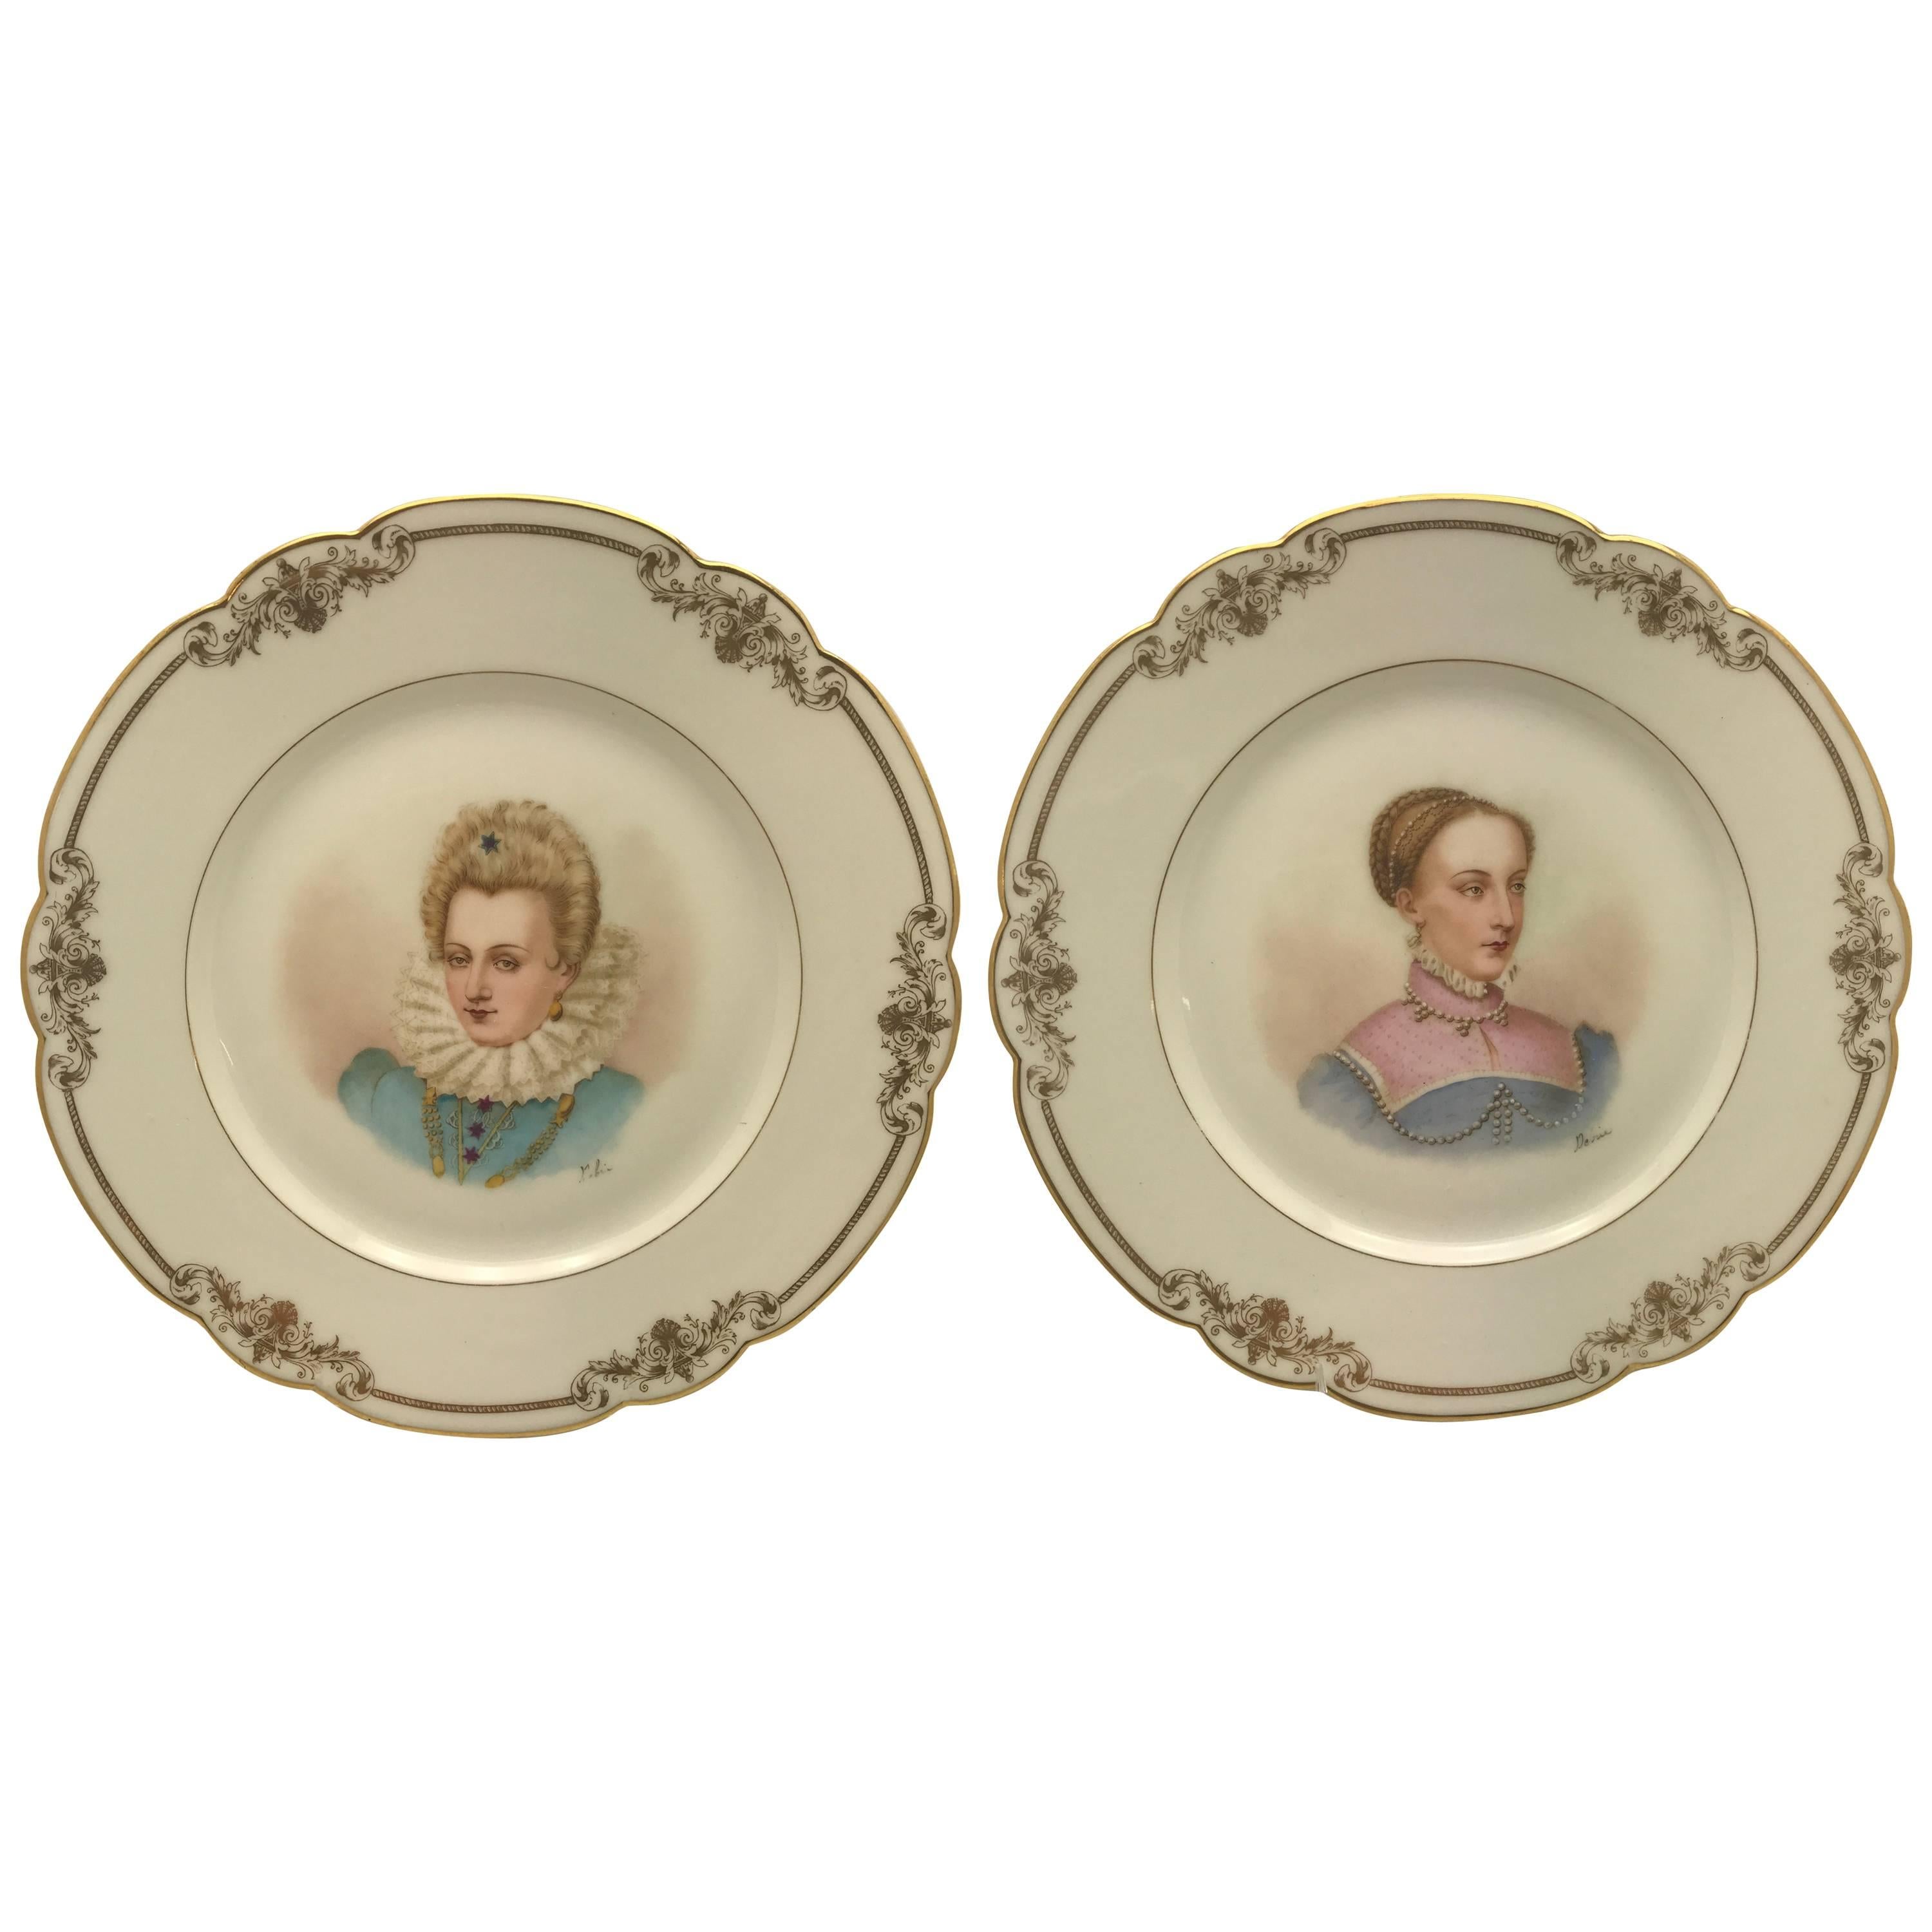 Pair of Antique Sevres France Portrait Plates, Hand-Painted Artist Signed